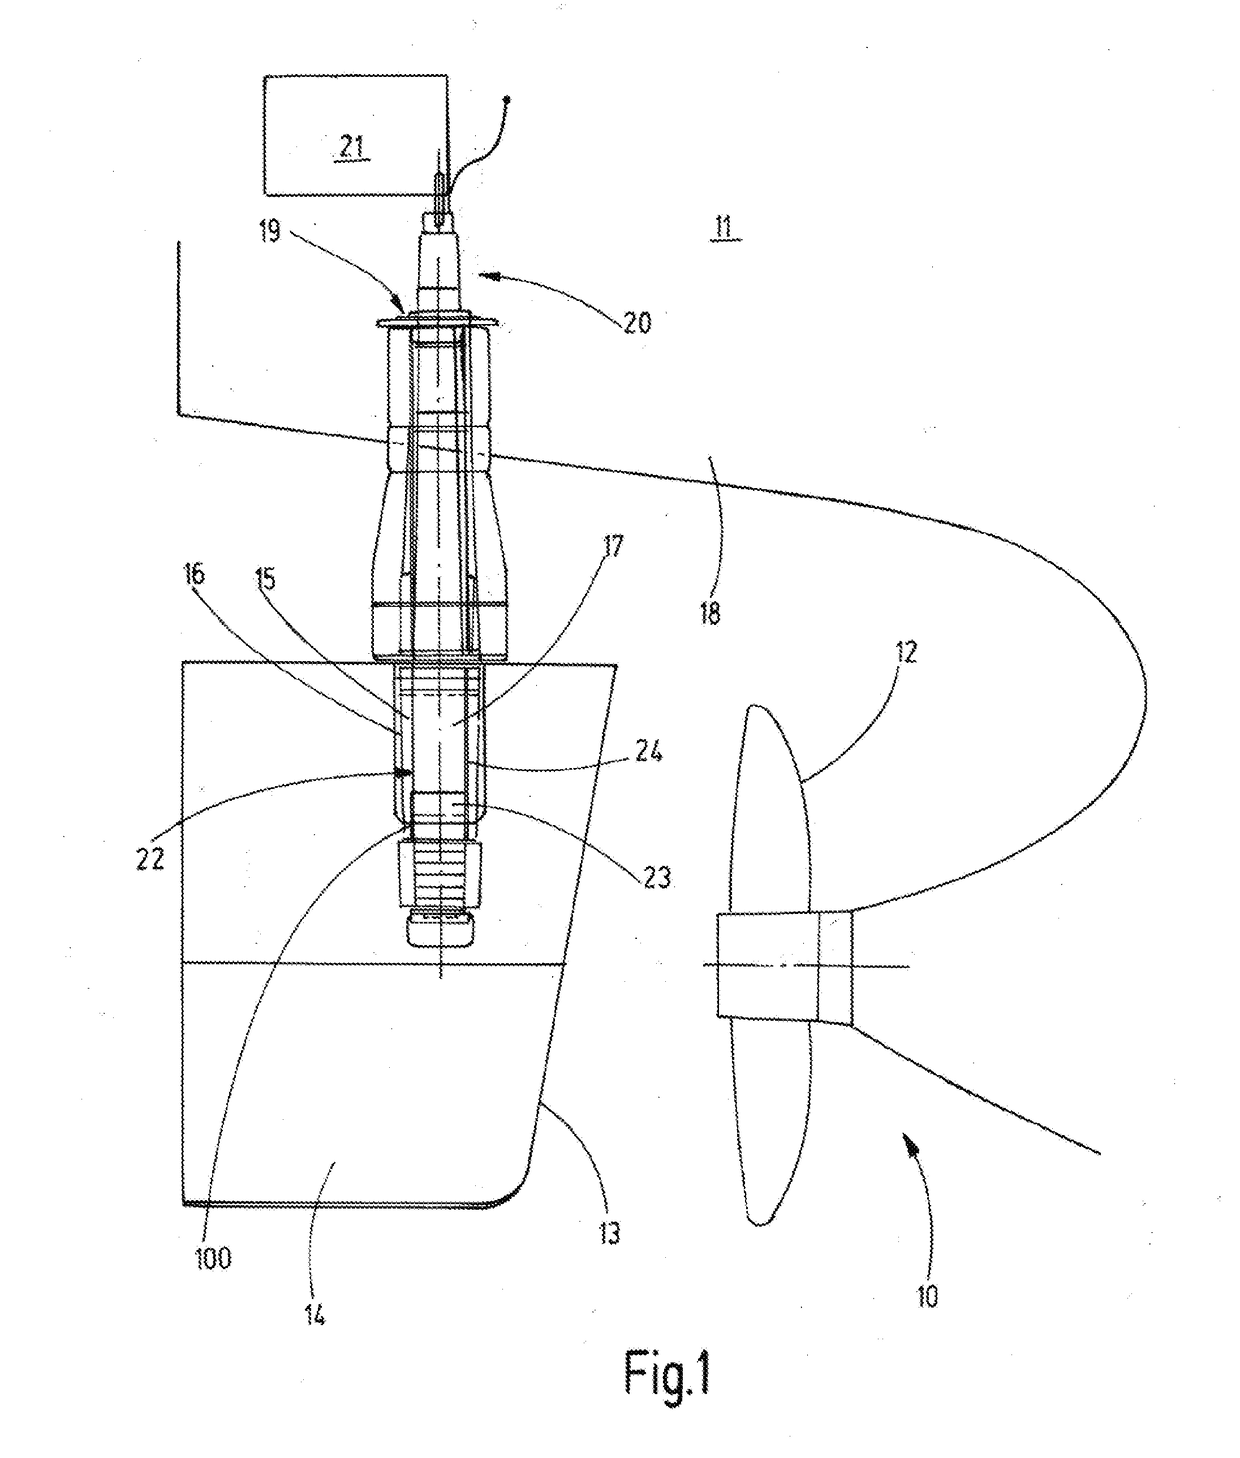 Bearing for supporting a shaft, in particular a rudder shaft, or a rudder blade, electronic bearing clearance measuring device, rudder comprising a bearing for supporting a shaft or a rudder blade, and method for measuring wear of a bearing for supporting a shaft or a rudder blade